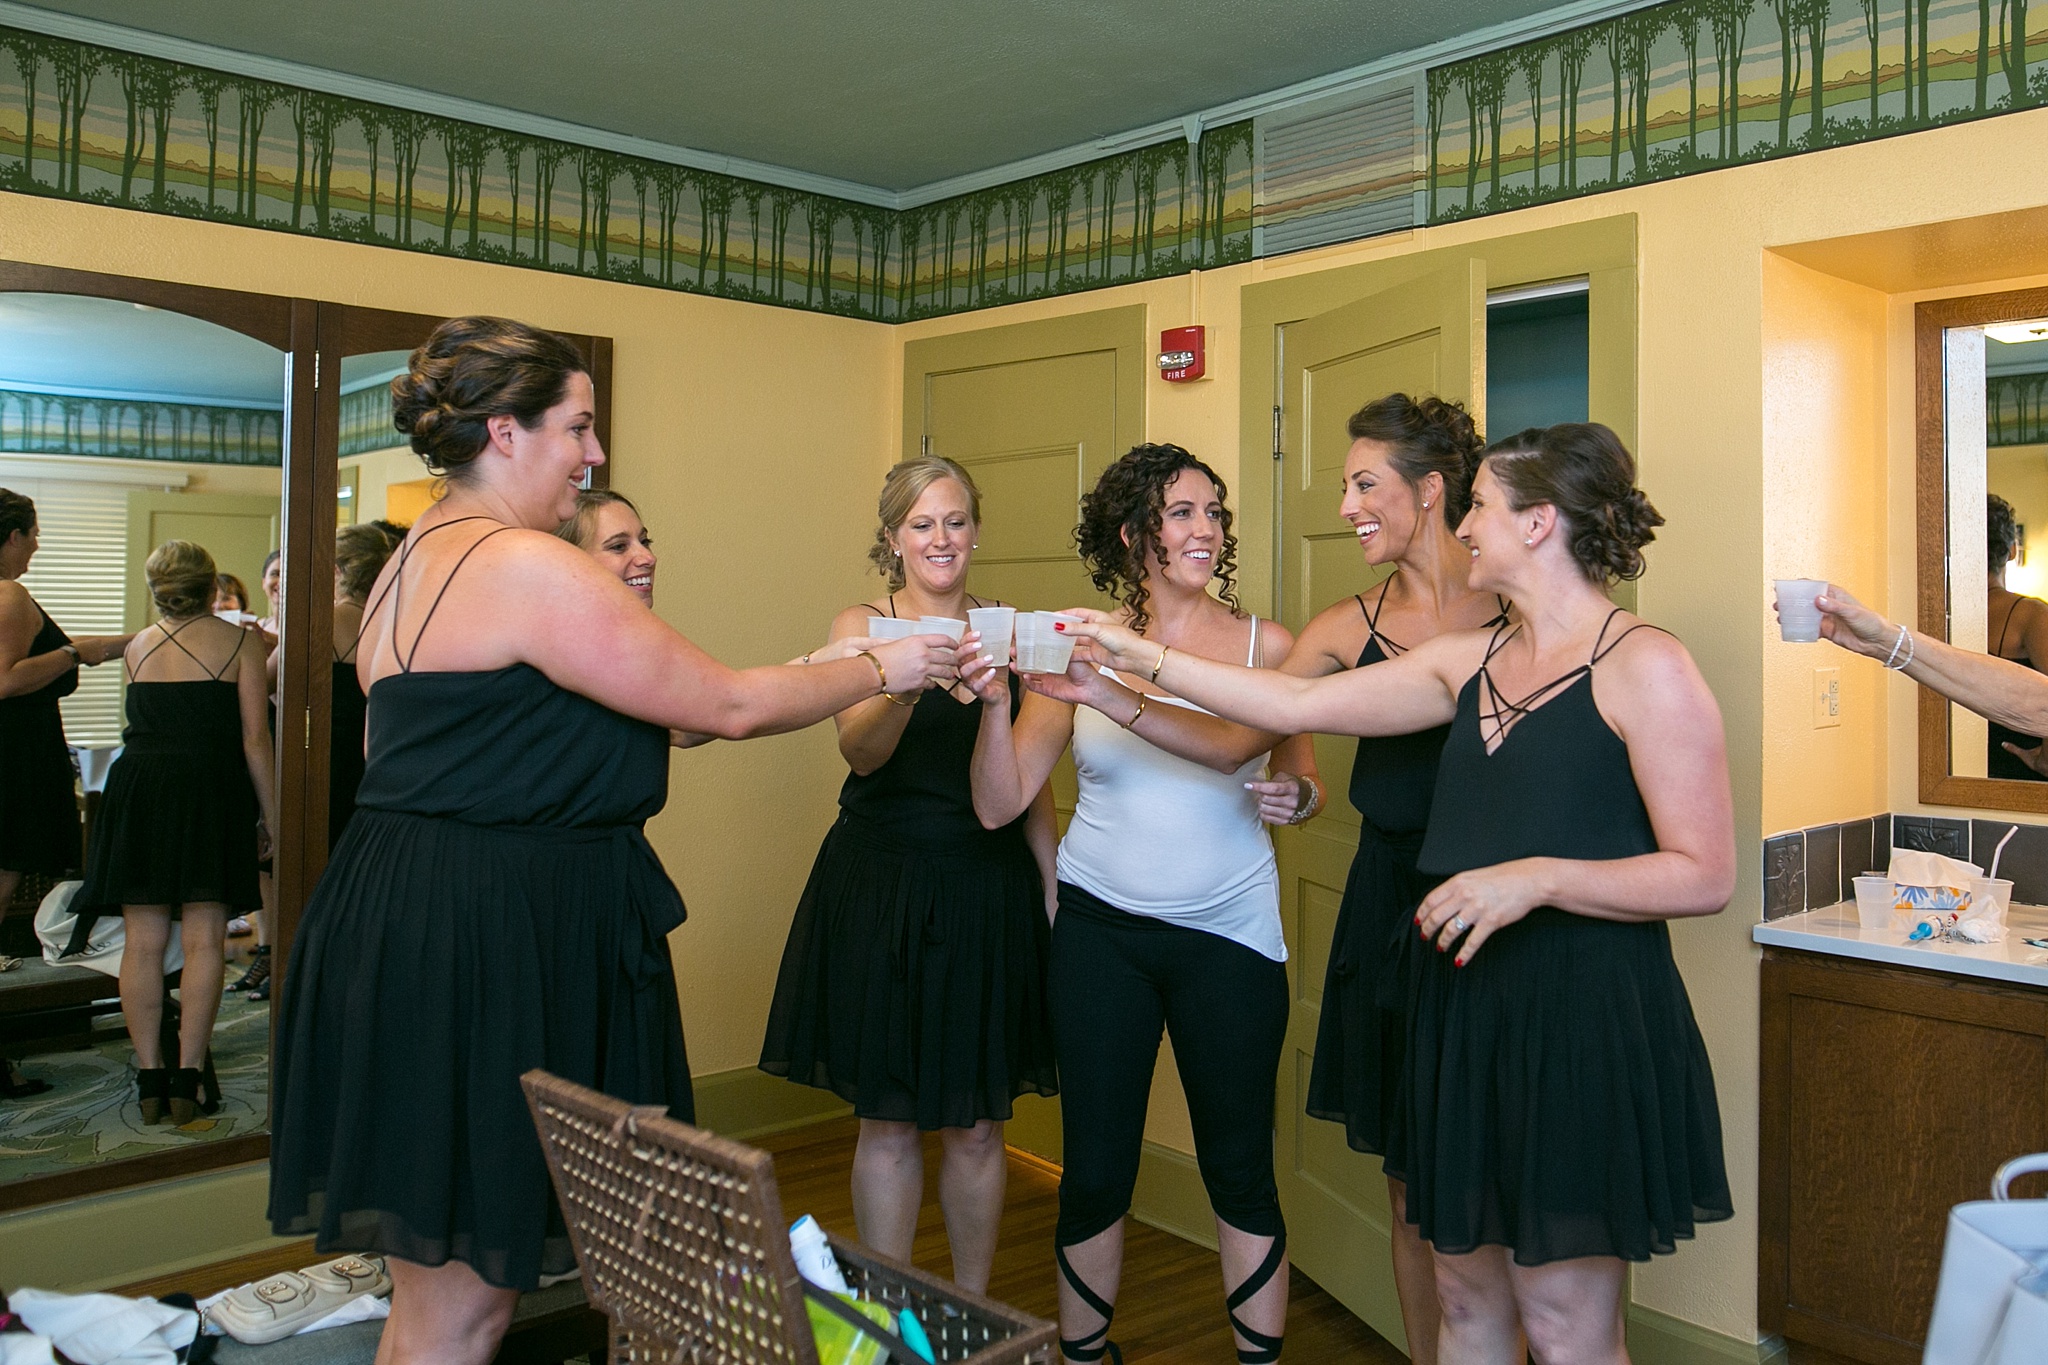 Bride & Bridesmaids toasting with champagne. Kellie & Brian’s Colorado Mountain Wedding at the historic Boettcher Mansion by Colorado Wedding Photographer, Jennifer Garza. Colorado Wedding Photographer, Colorado Wedding Photography, Colorado Mountain Wedding Photographer, Colorado Mountain Wedding, Mountain Wedding Photographer, Boettcher Mansion Wedding Photographer, Boettcher Mansion Wedding, Mountain Wedding, Lookout Mountain Wedding Photographer, Golden Wedding Photographer, Colorado Bride